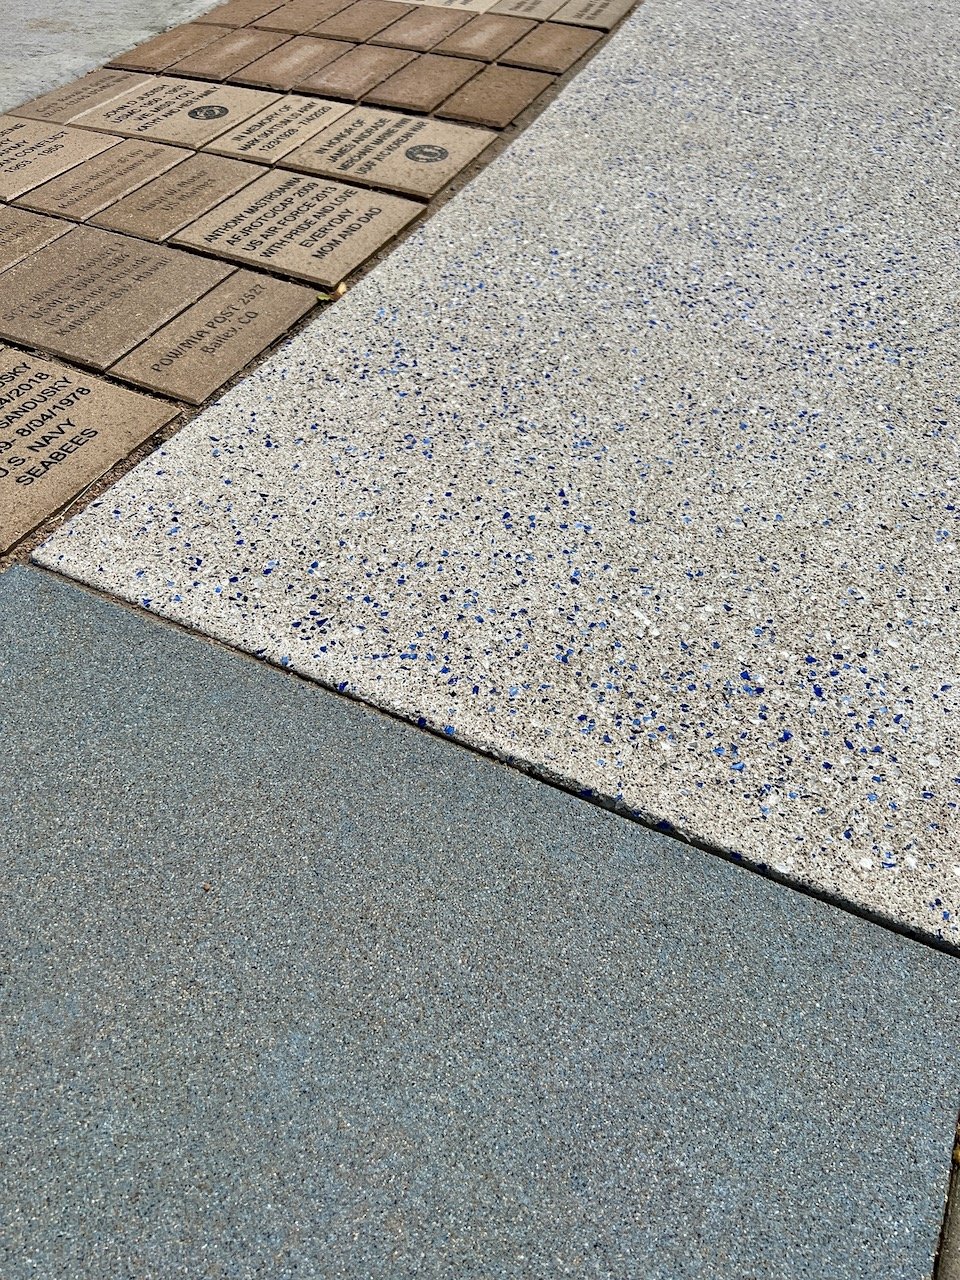 White and blue exposed aggregate concrete